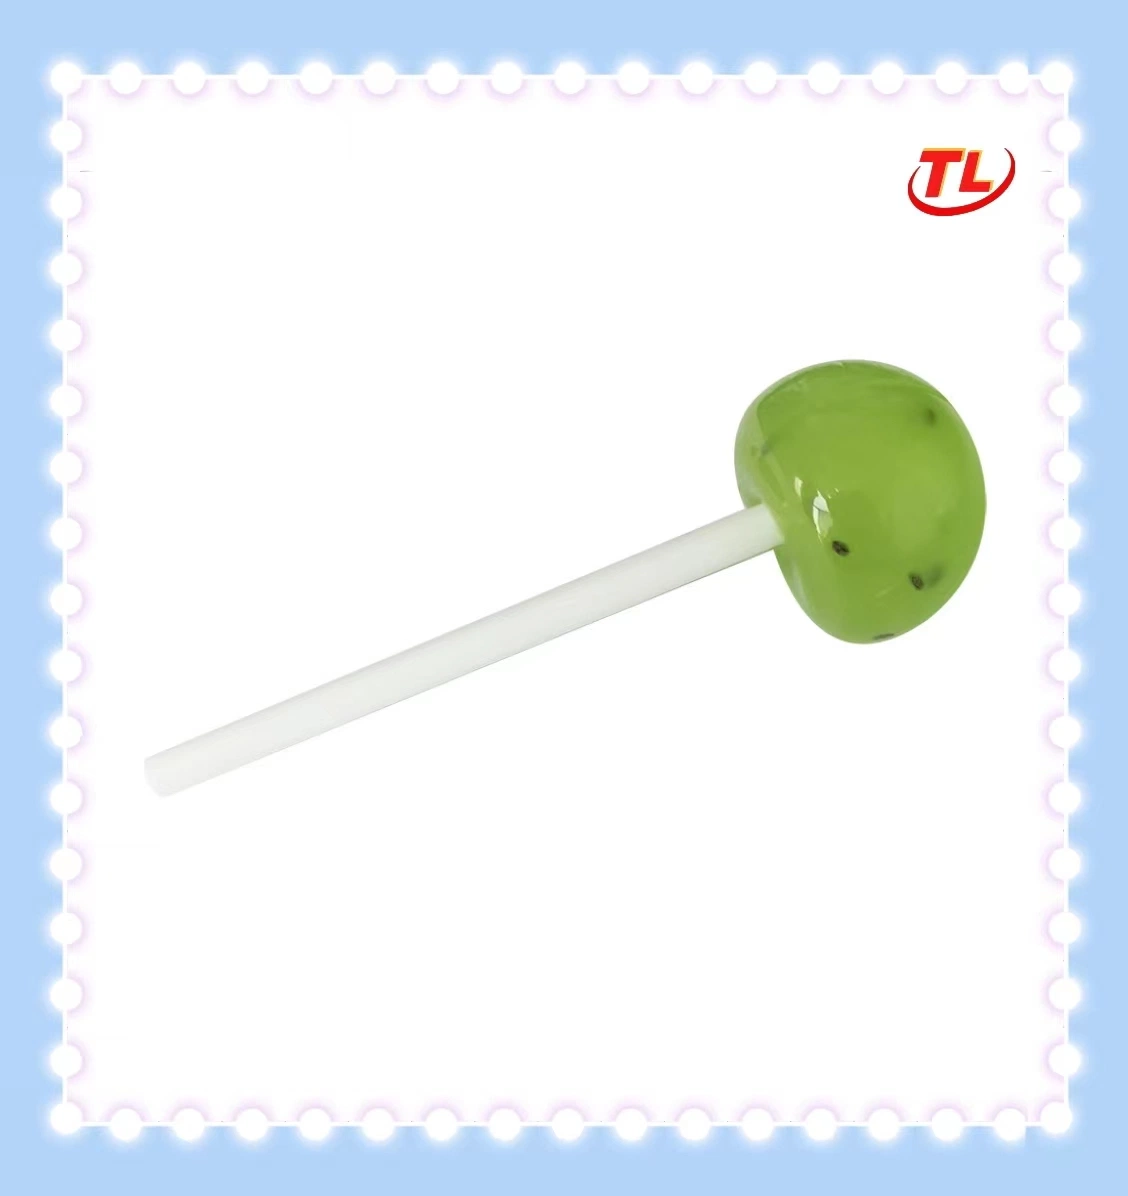 OEM Lollipop Fruit Hard Candy with Mix Fruit Flavor with Safe Paper Stick